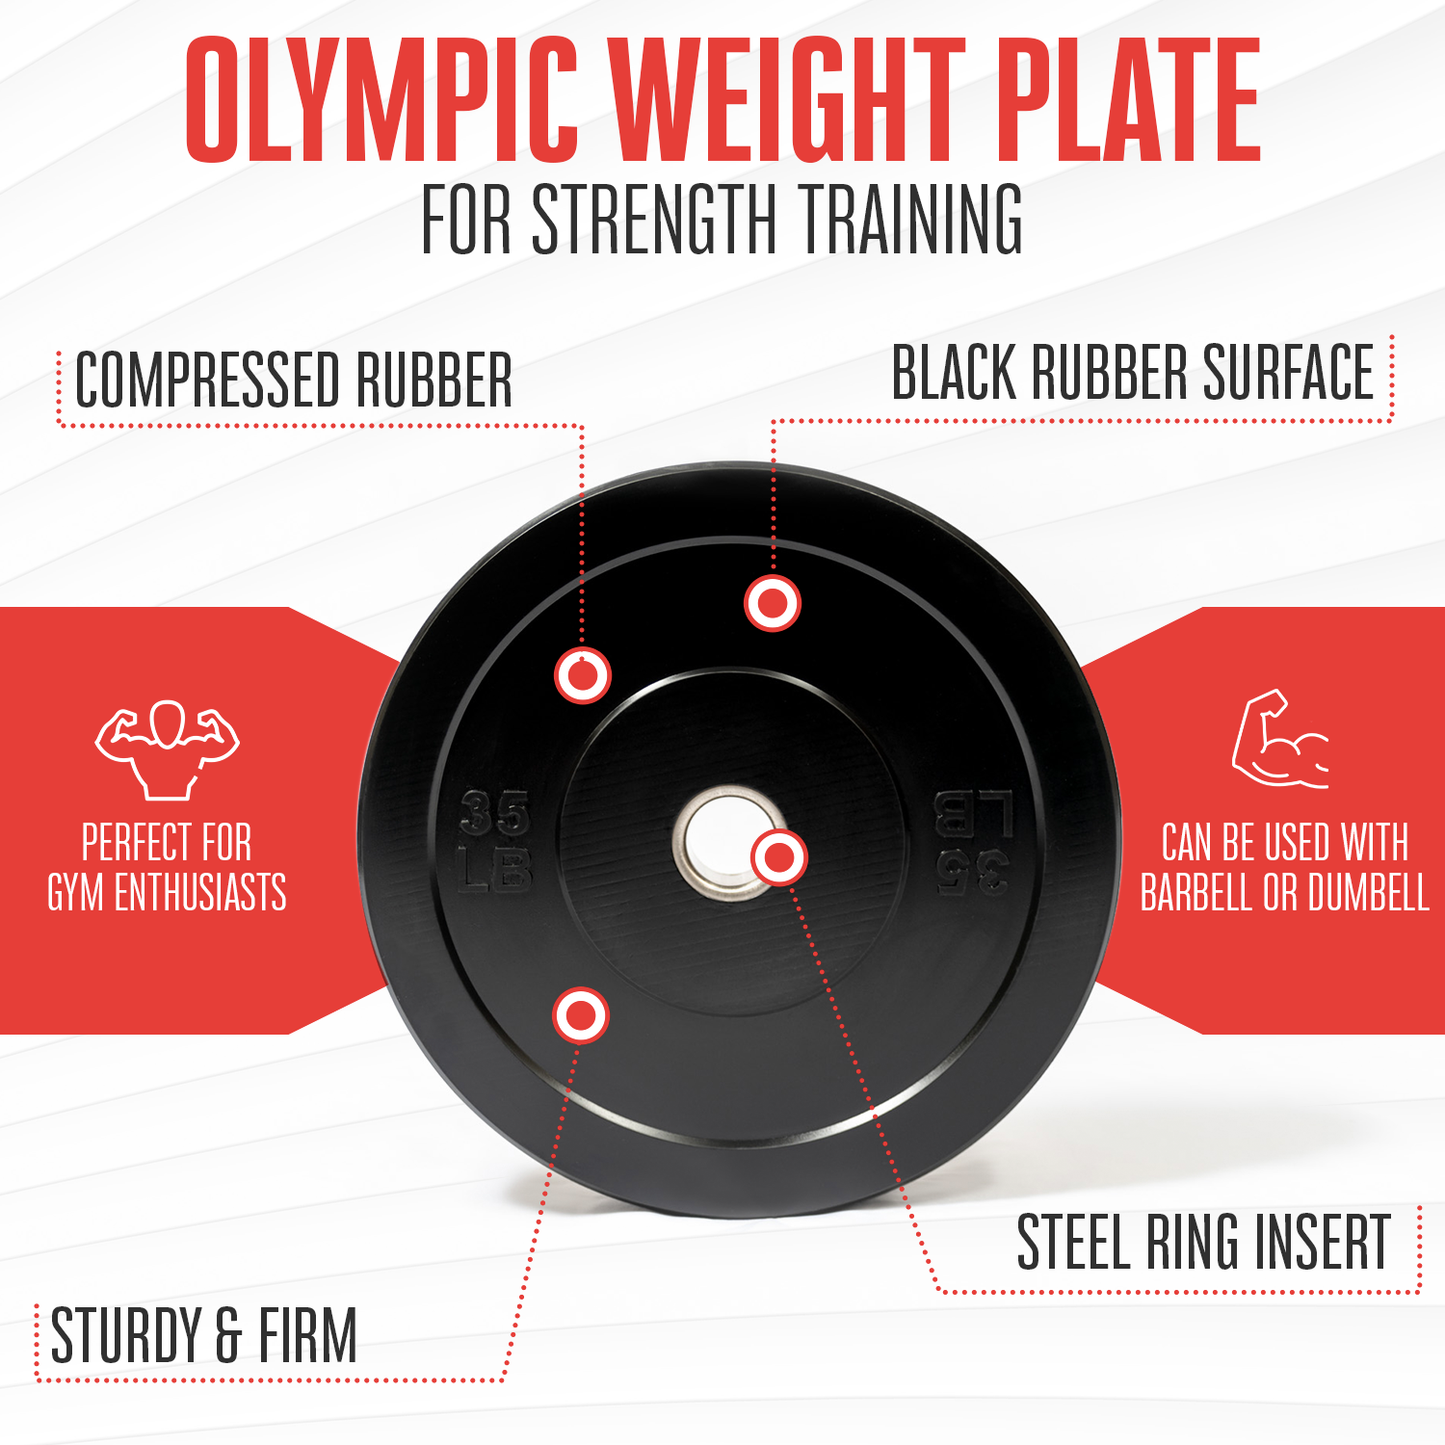 STRONGWAY™ OLYMPIC BUMPER WEIGHT PLATES